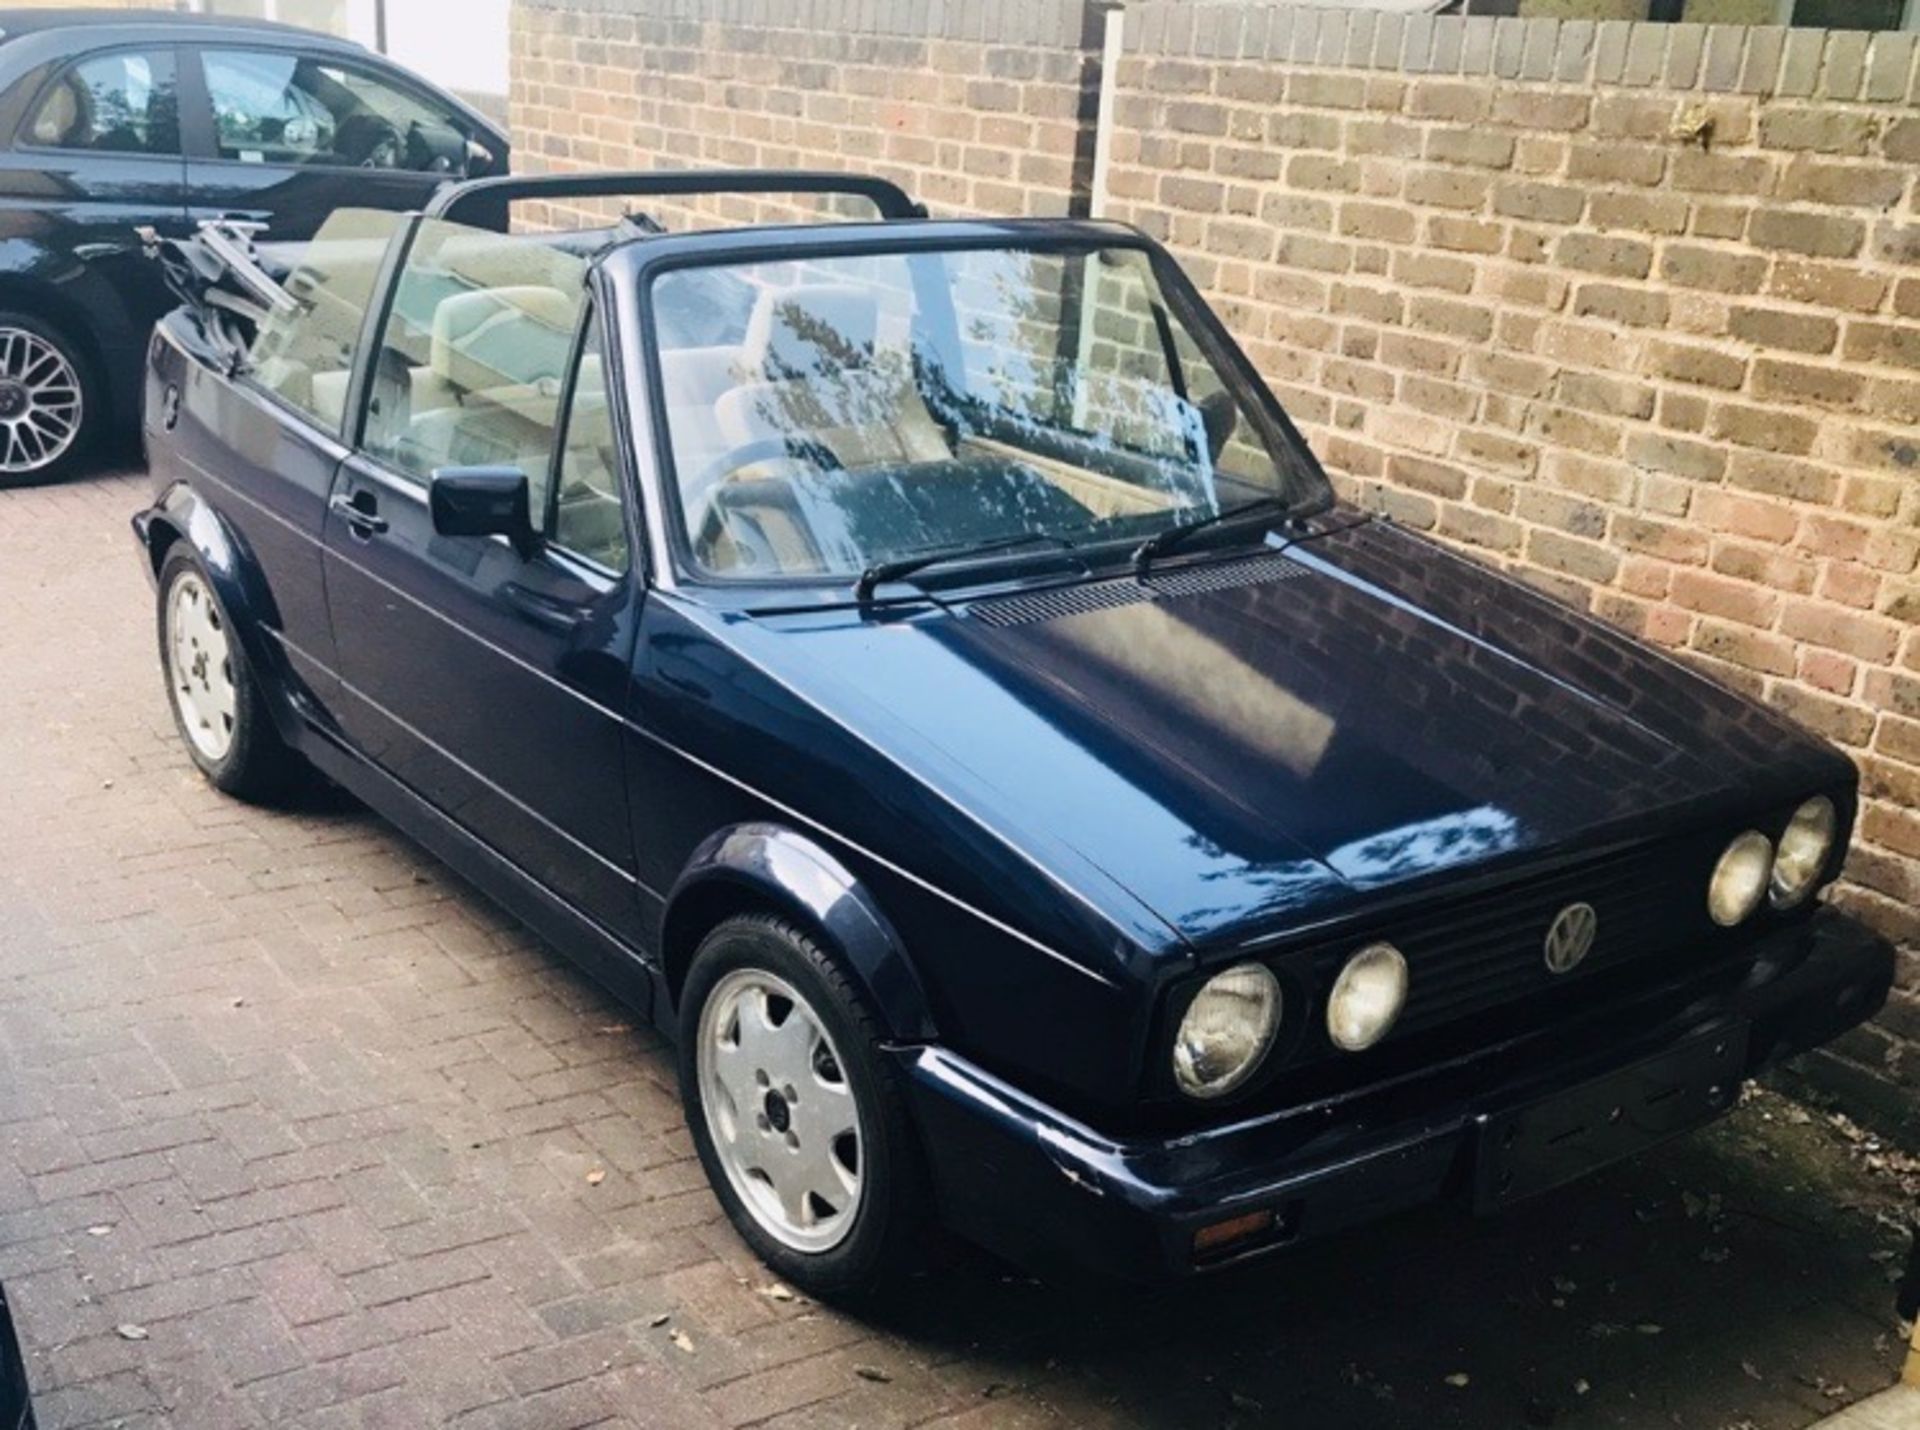 VW Golf MK1 GTI Rivage Leather Edition Convertible- K-Reg, 1993 HPI Clear.